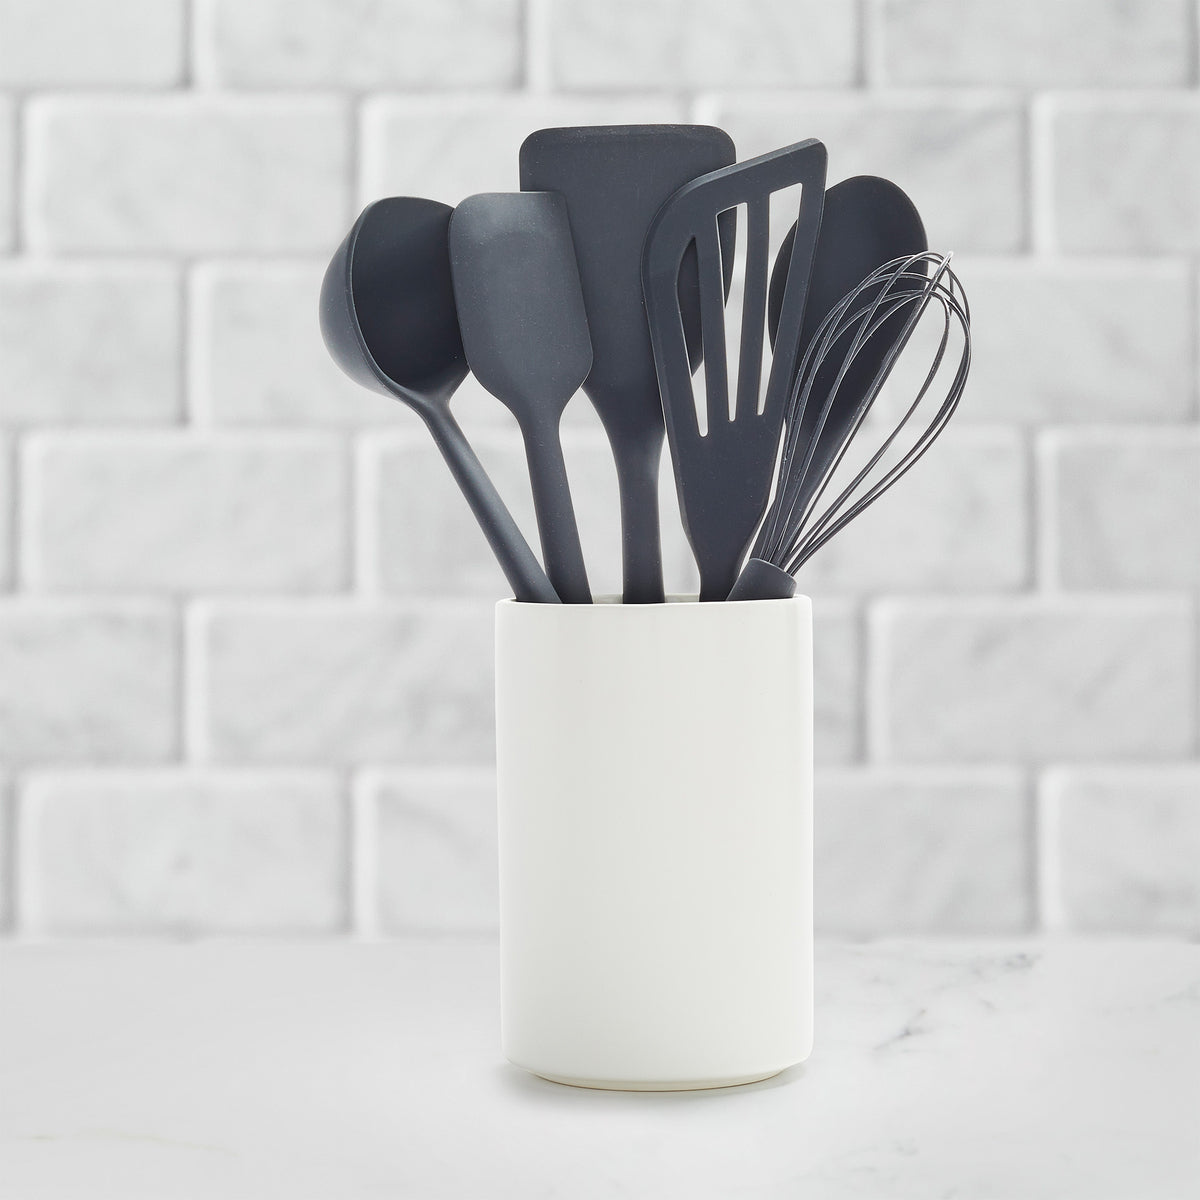 Daily Kitchen Utensil Set Silicone And Stainless Steel - Heat